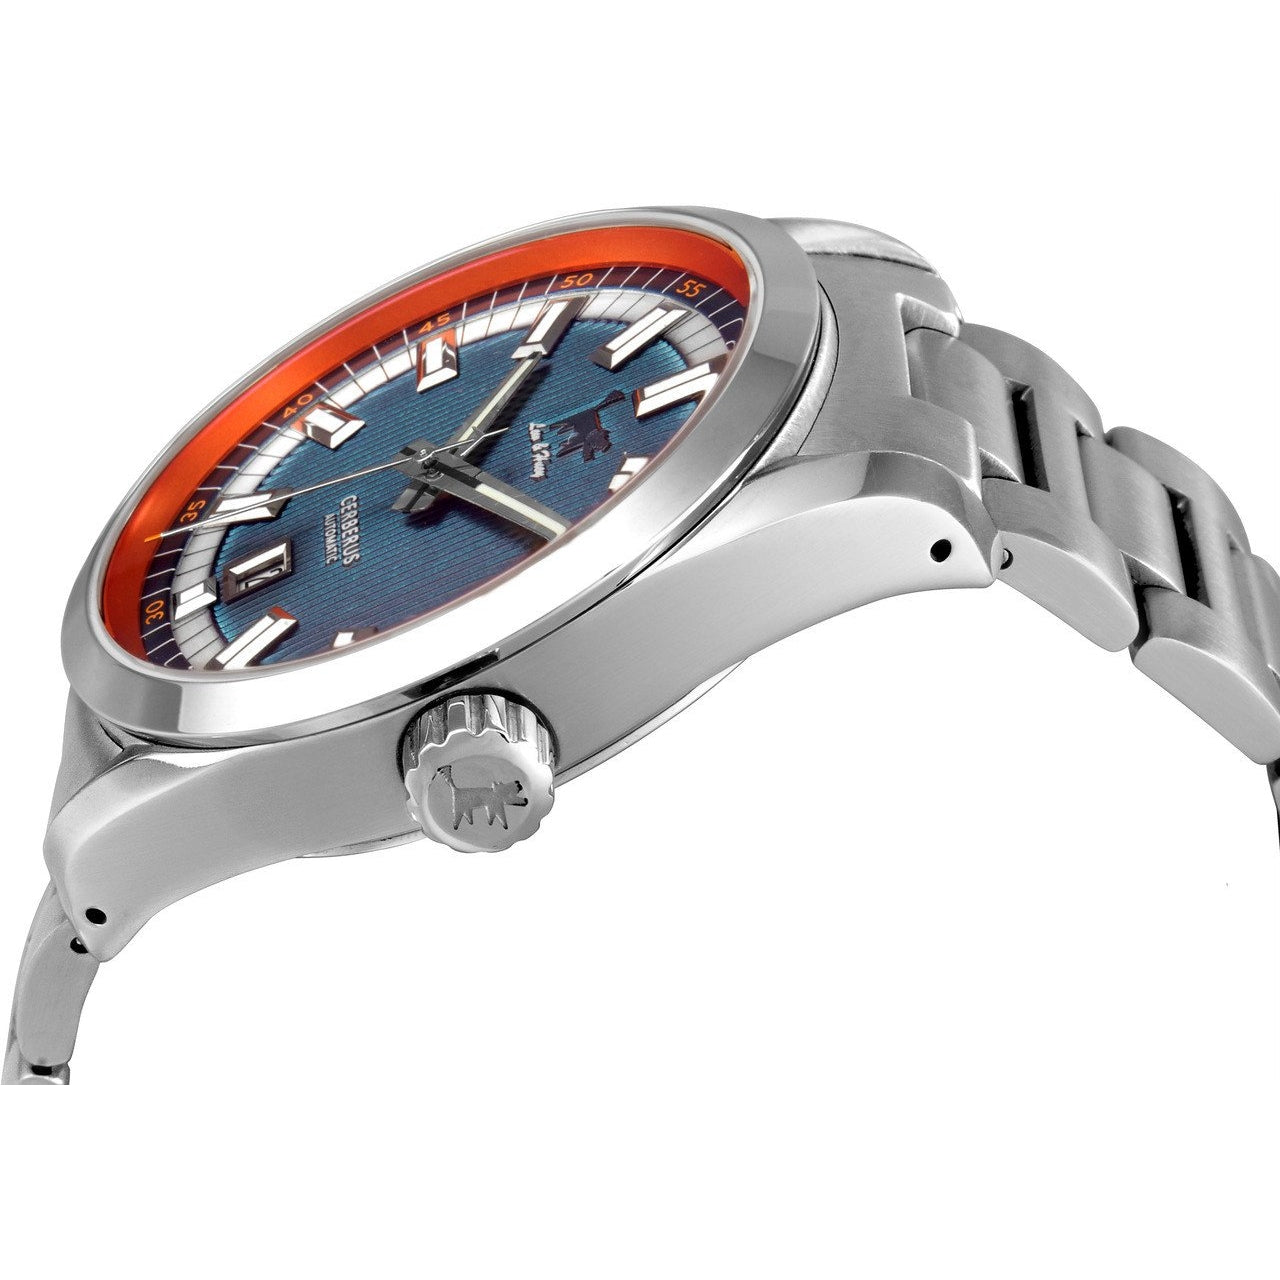 Lew and Huey Cerberus Automatic Watch (Blue & Orange) - Watchfinder General - UK suppliers of Russian Vostok Parnis Watches MWC G10
 - 2